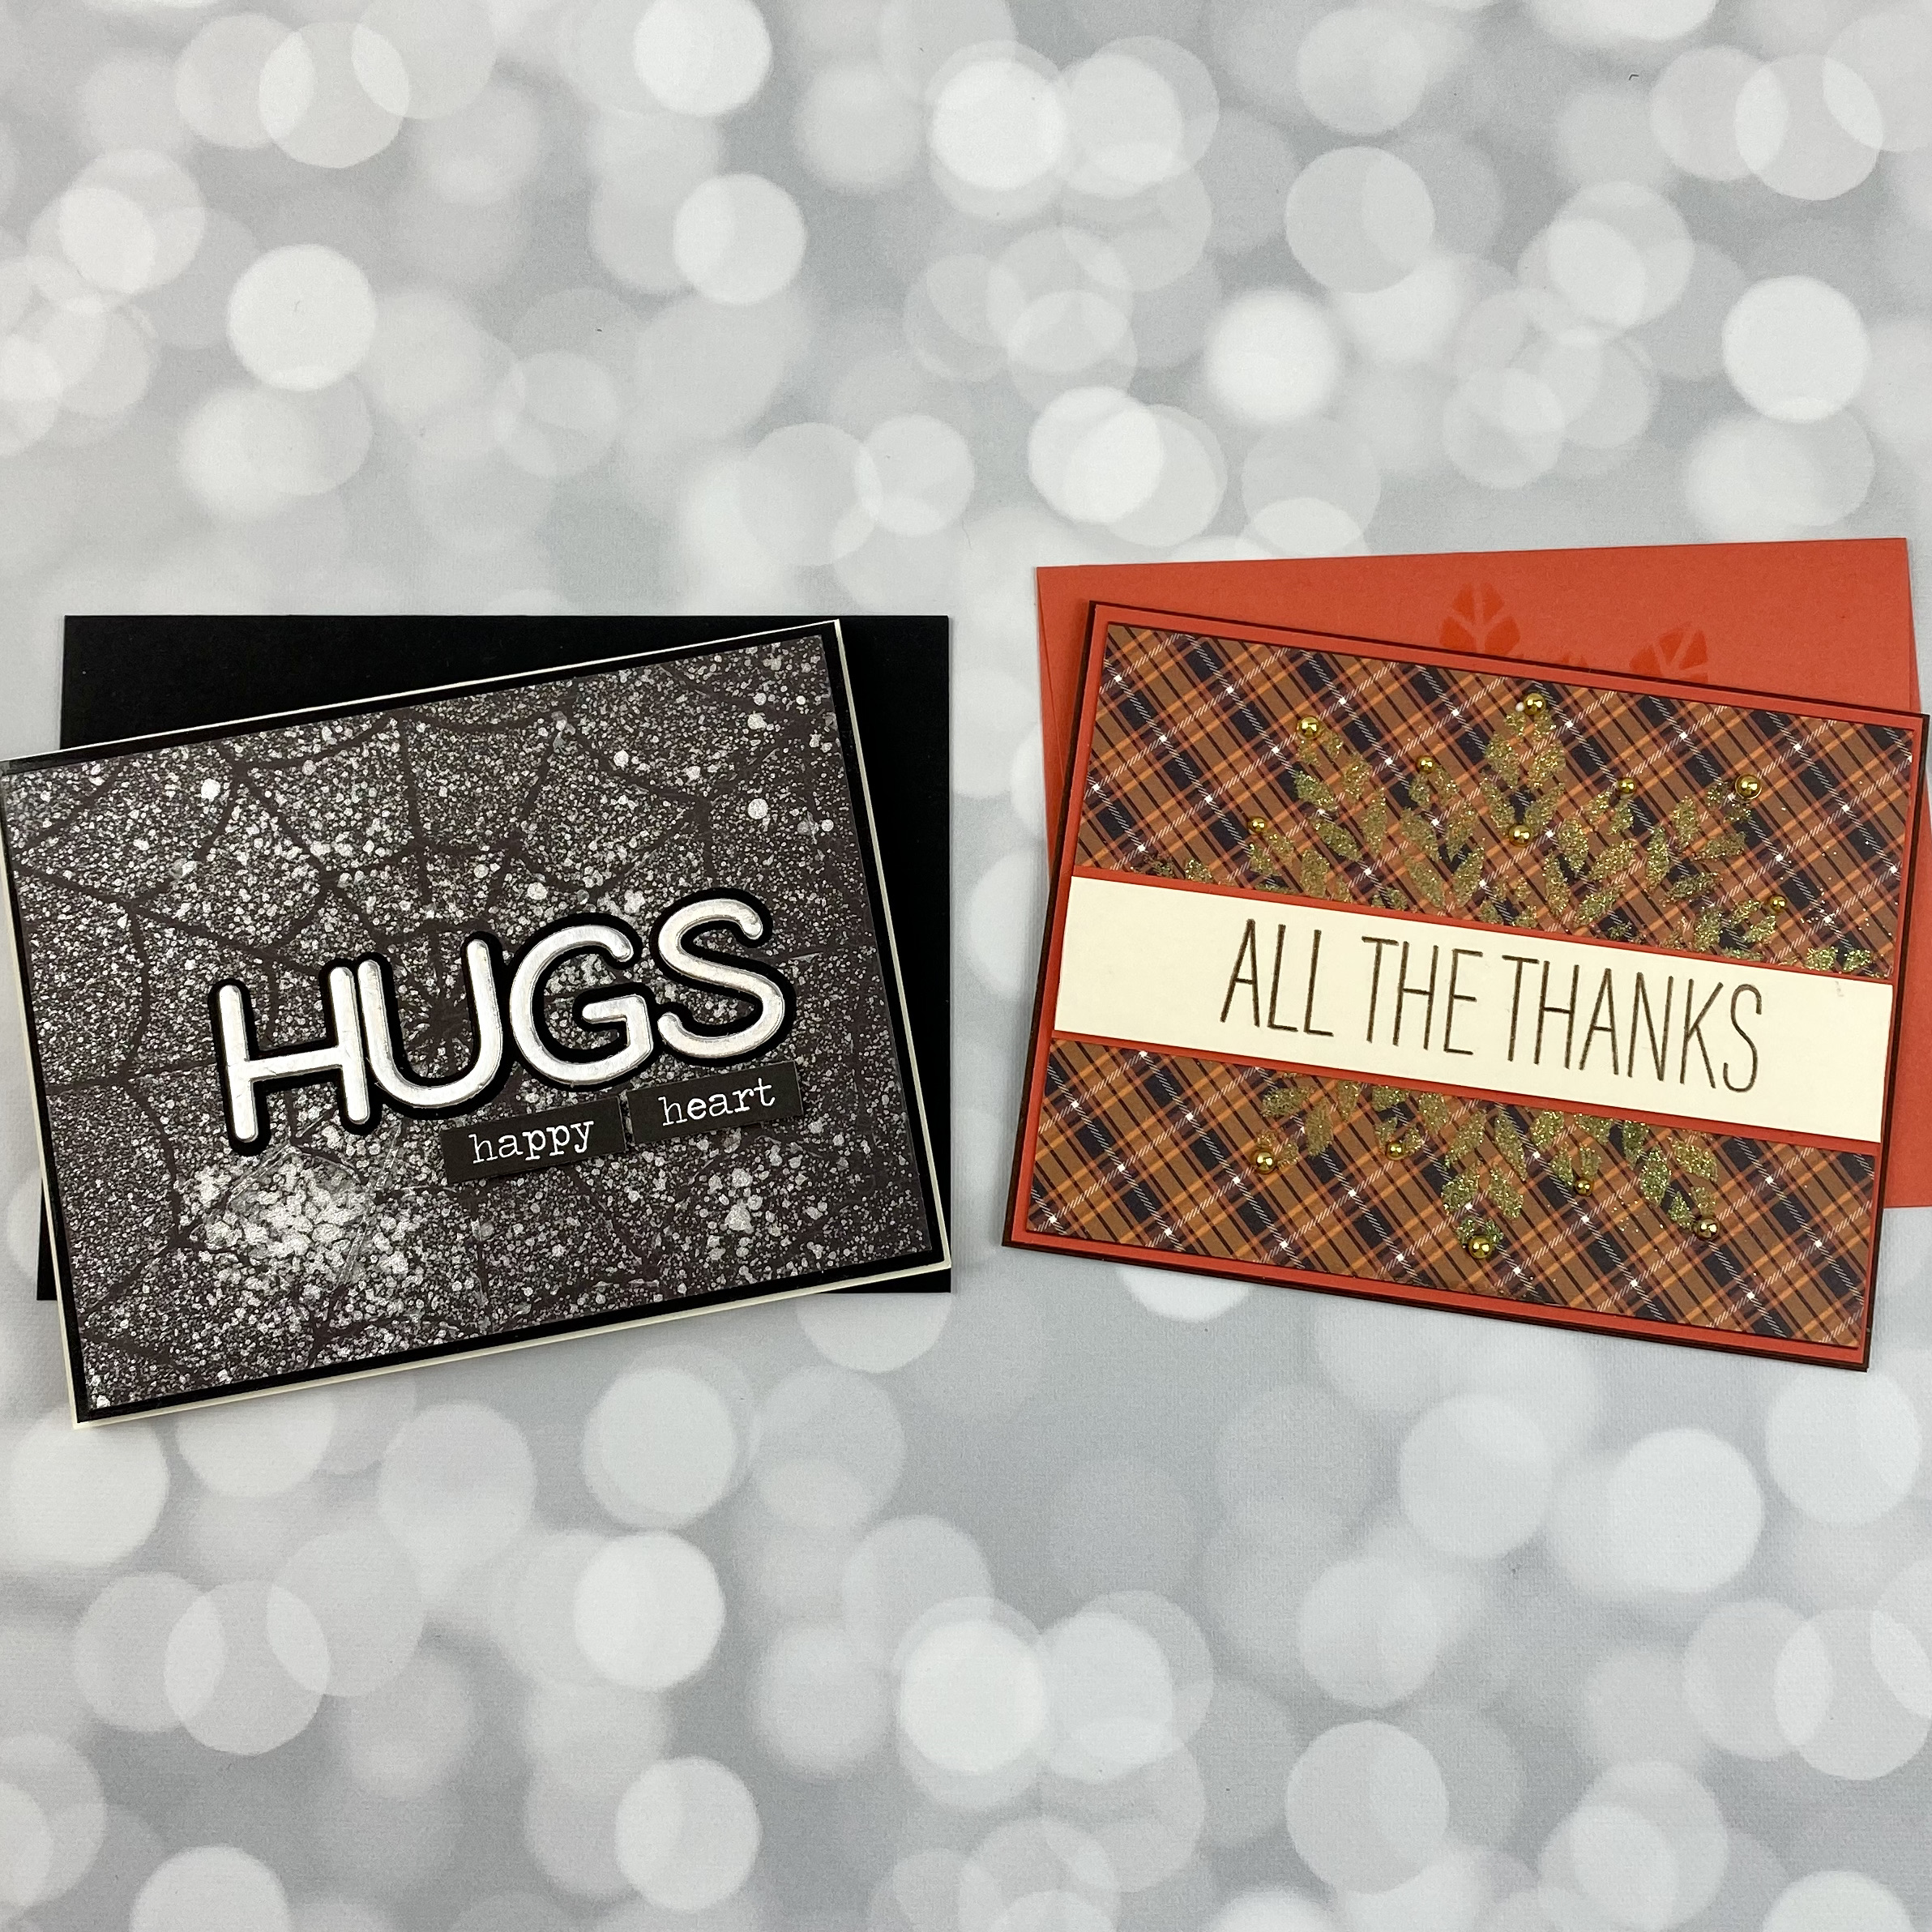 2 hand made cards made out of pattern paper. One says 'All the thanks' and the other says 'hugs' | pattern paper cards | Positively Jane